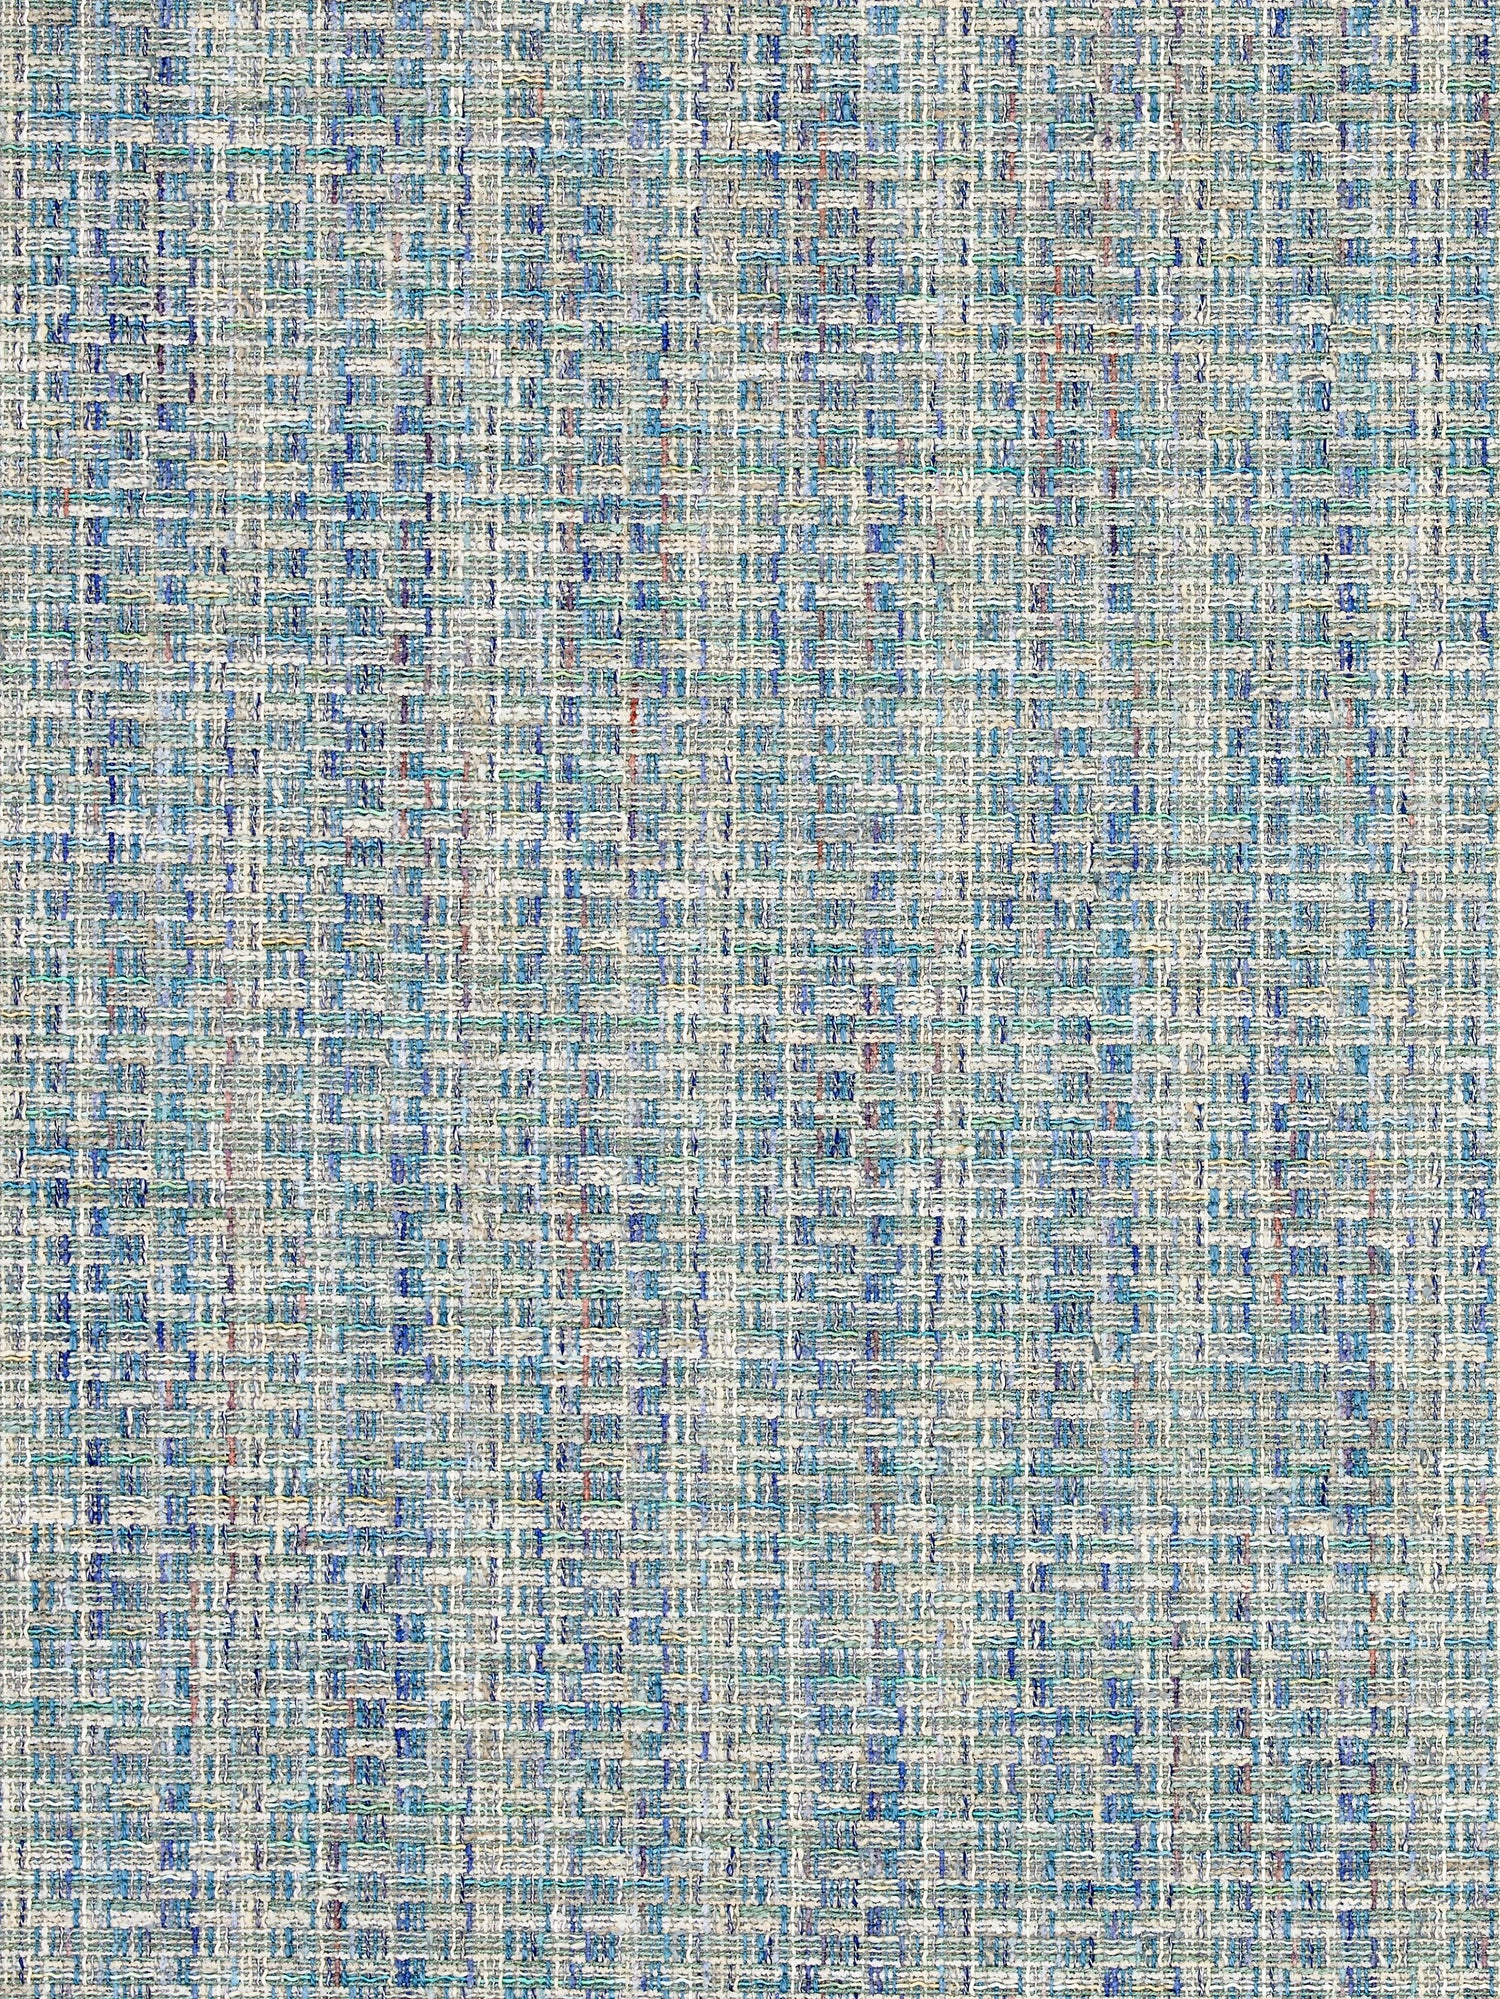 Faye fabric in cornflower color - pattern number BI 0002FAYE - by Scalamandre in the Old World Weavers collection